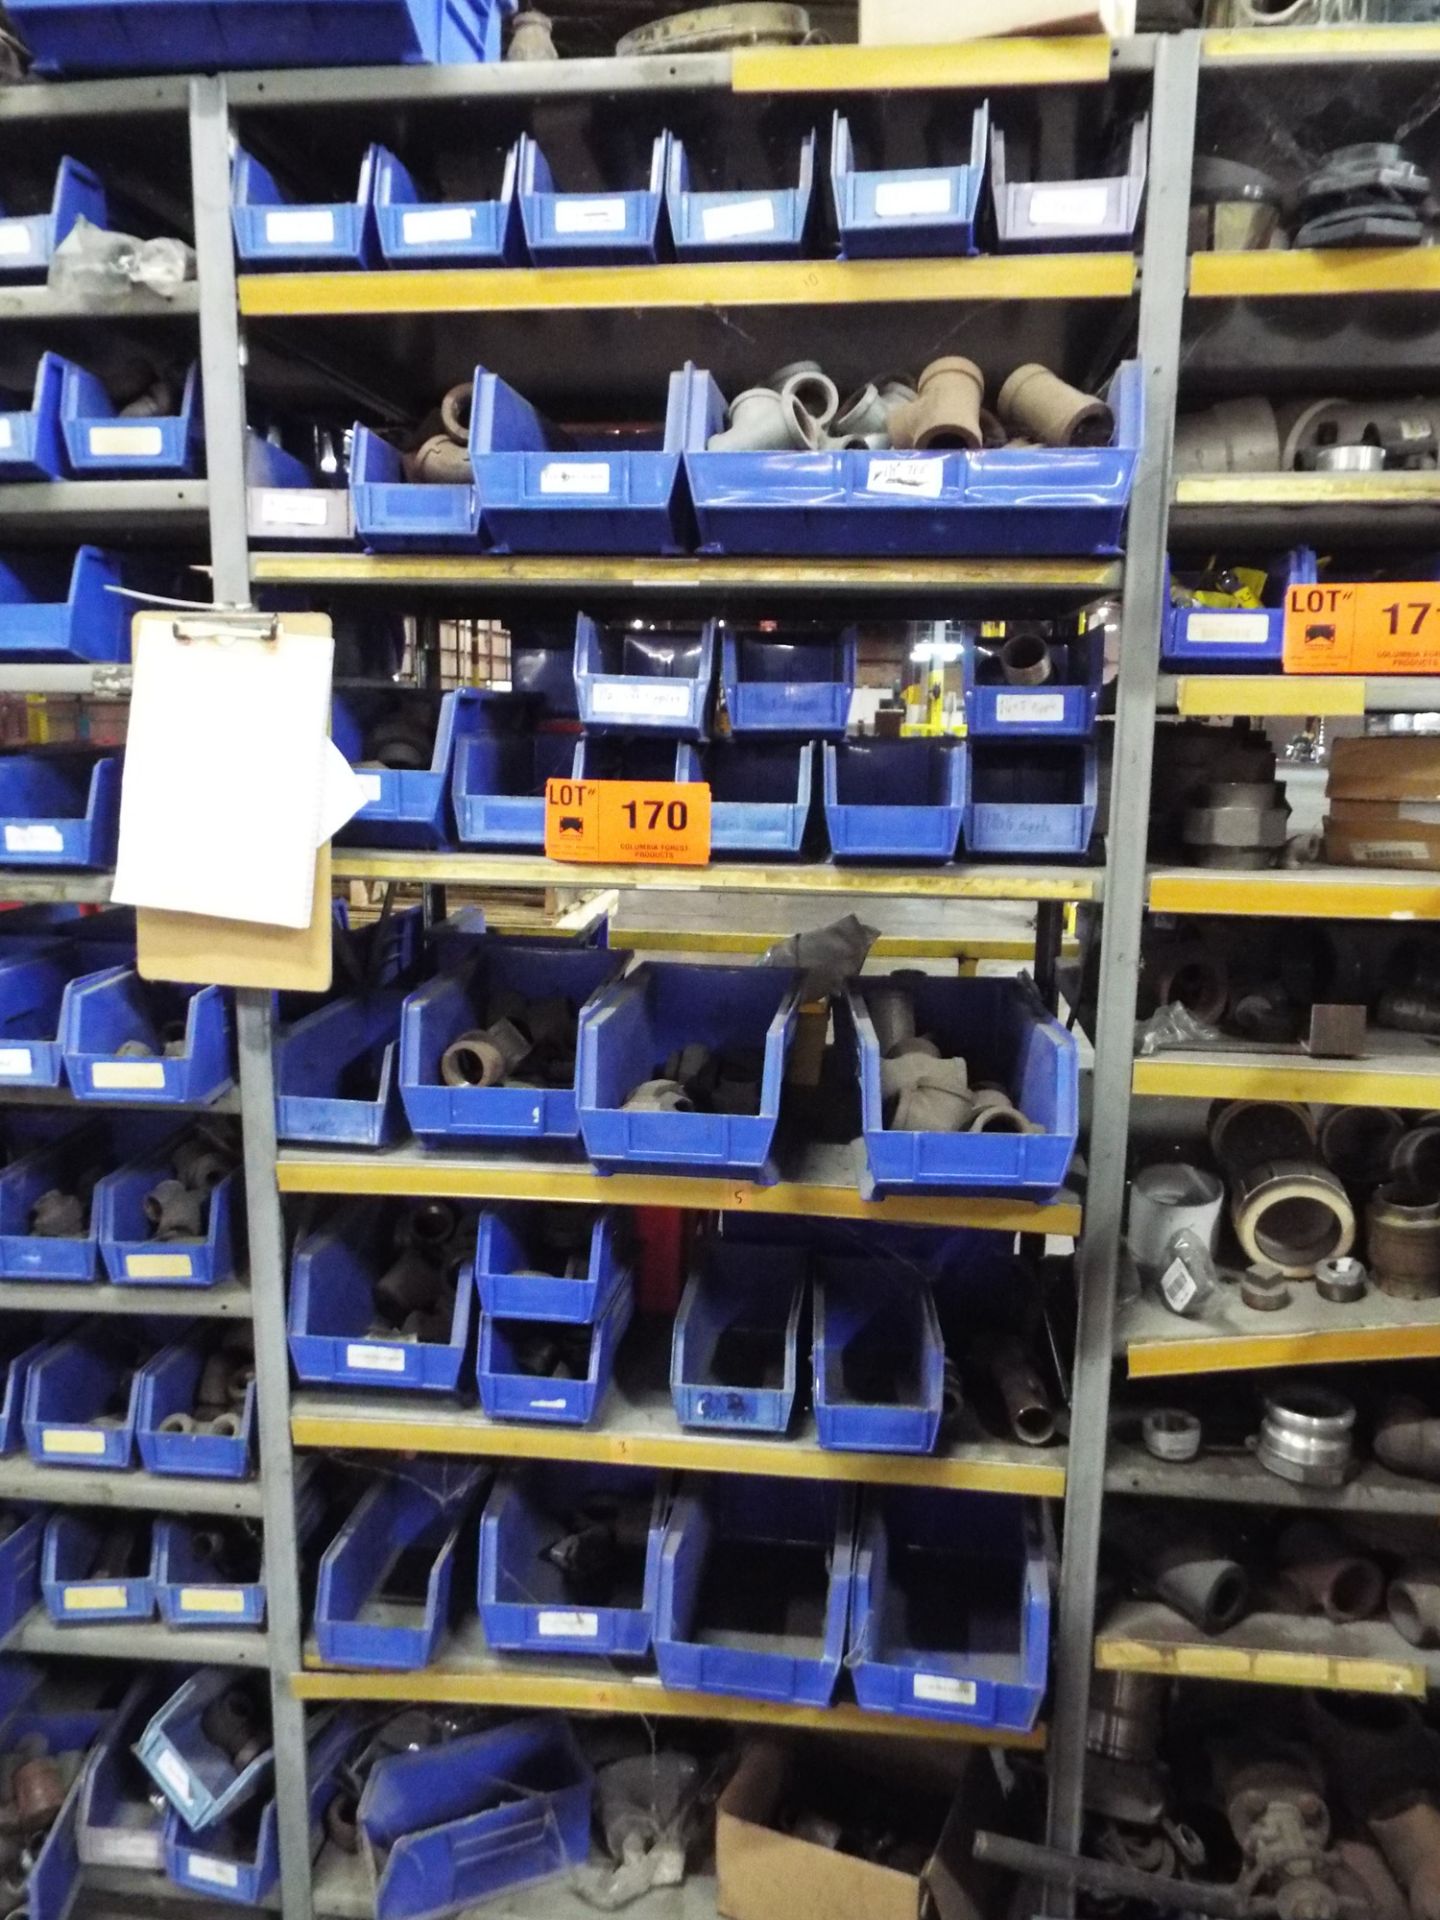 LOT/ CONTENTS OF SHELF - INCLUDING BUT NOT LIMITED TO PIPE FITTINGS AND HARDWARE